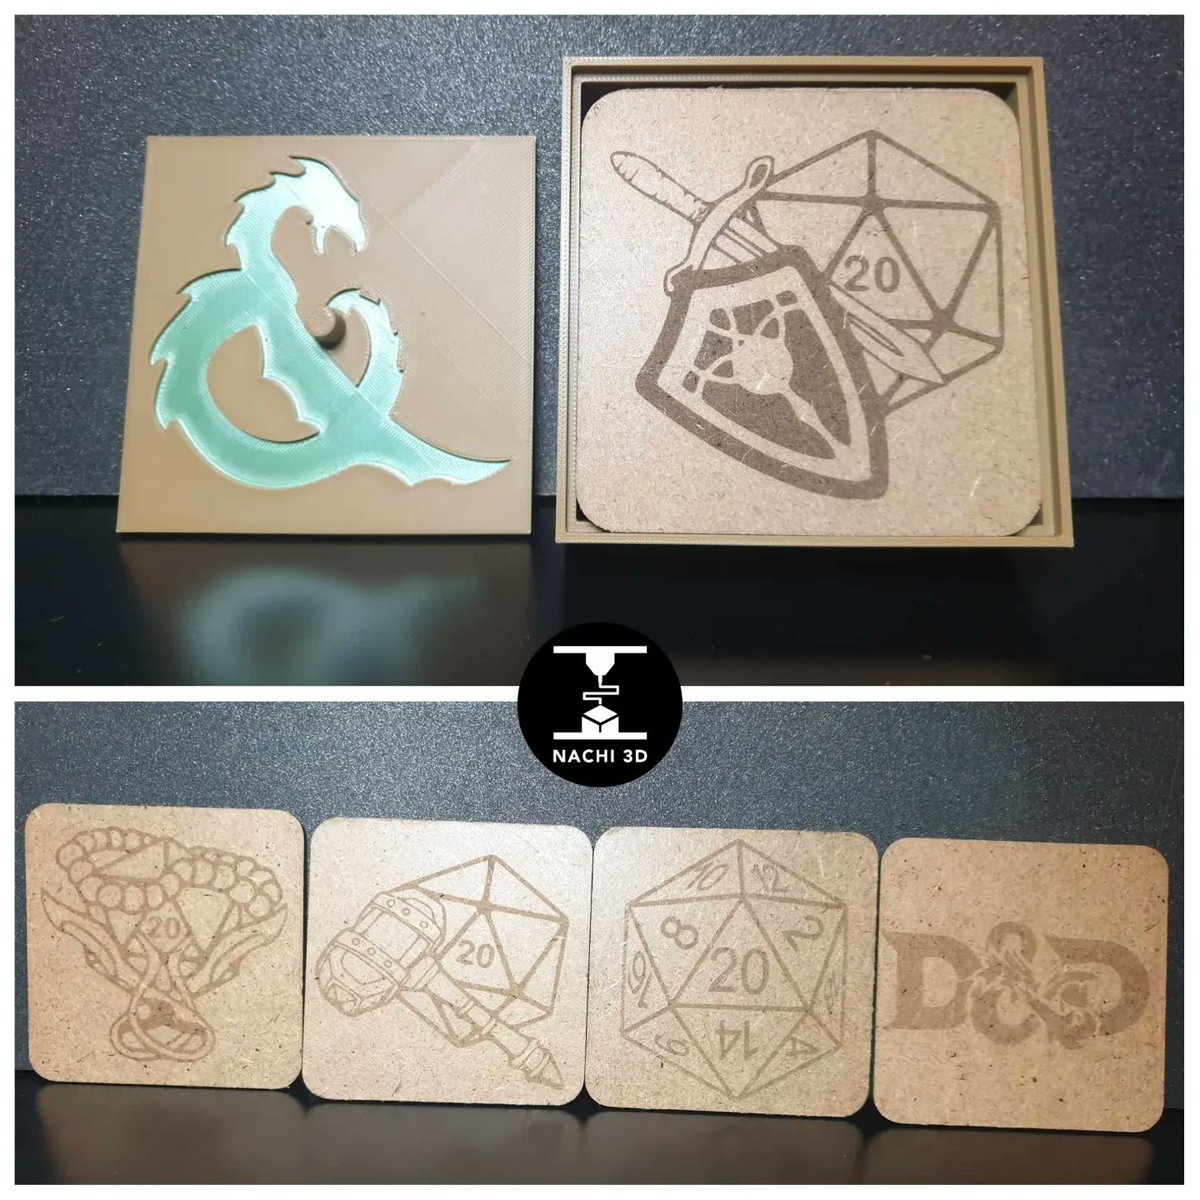 Elevate your game night with our custom RPG coasters! 🐉✨ #RPG #Tabletop #Gaming #BambuLab #3DPrinting #NACHI3D #GameNight #Fantasy #Coasters #DnD #TabletopGaming #RPGlife #GeekGear #BoardGames #DungeonMaster #CriticalRole #RPGCommunity #Handmade #GamerDecor #Roleplay #DiceGames